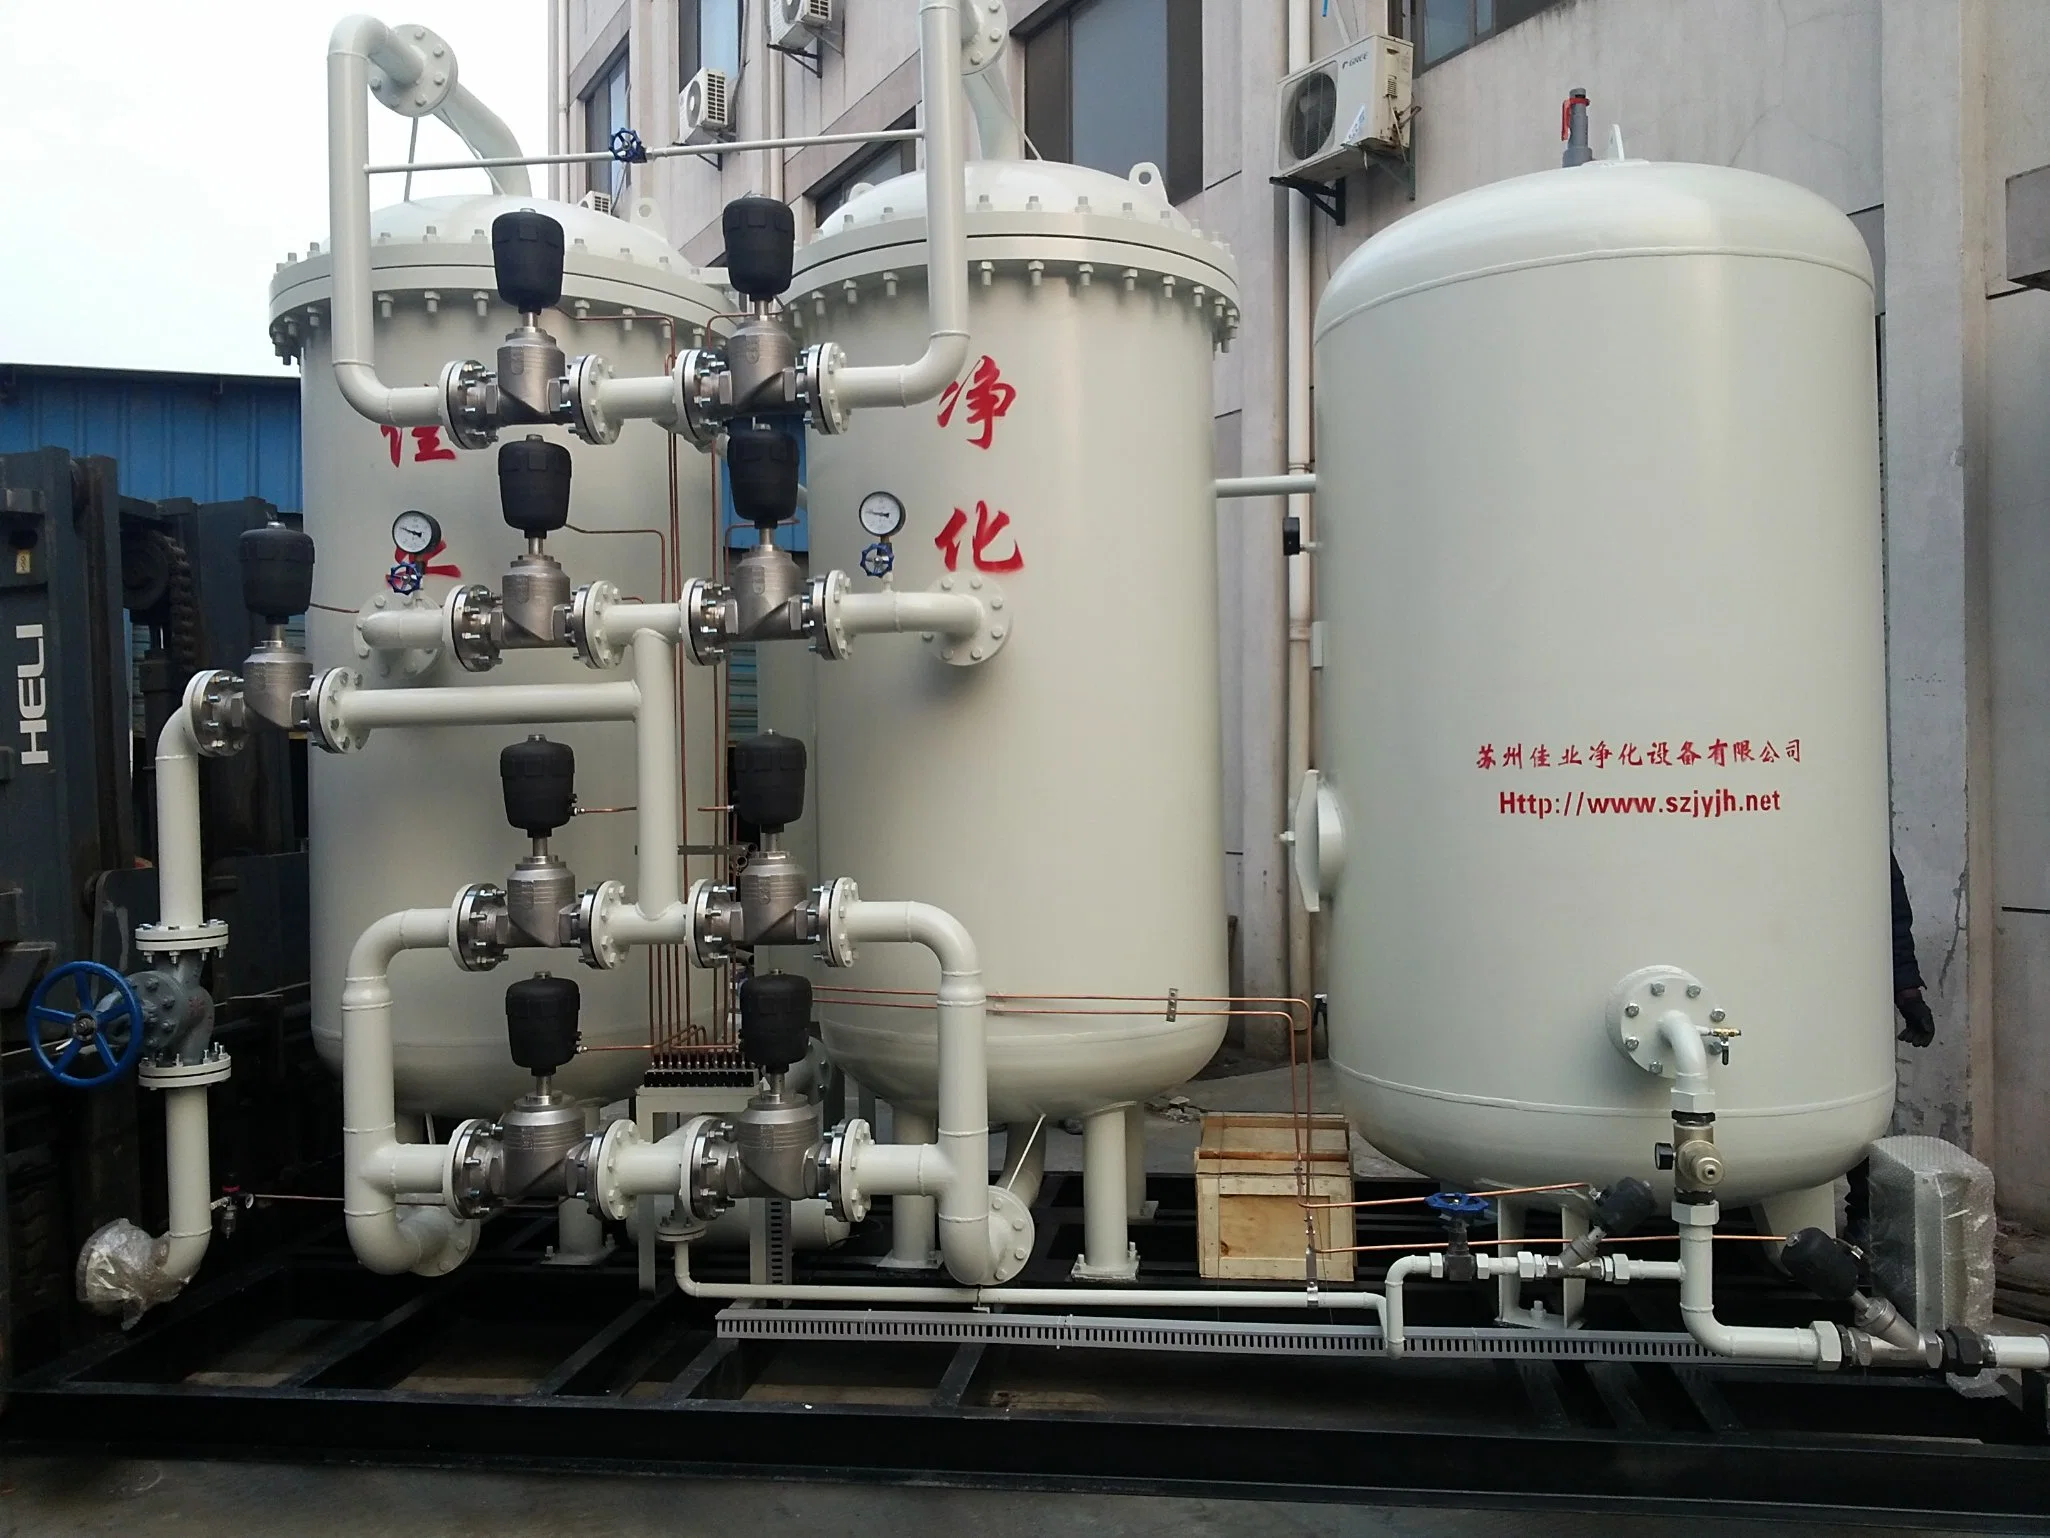 Highly Automatic Nitrogen Generator High Performance Industrial Equipment for Quenching and Vacuum Processing (ISO/CE)